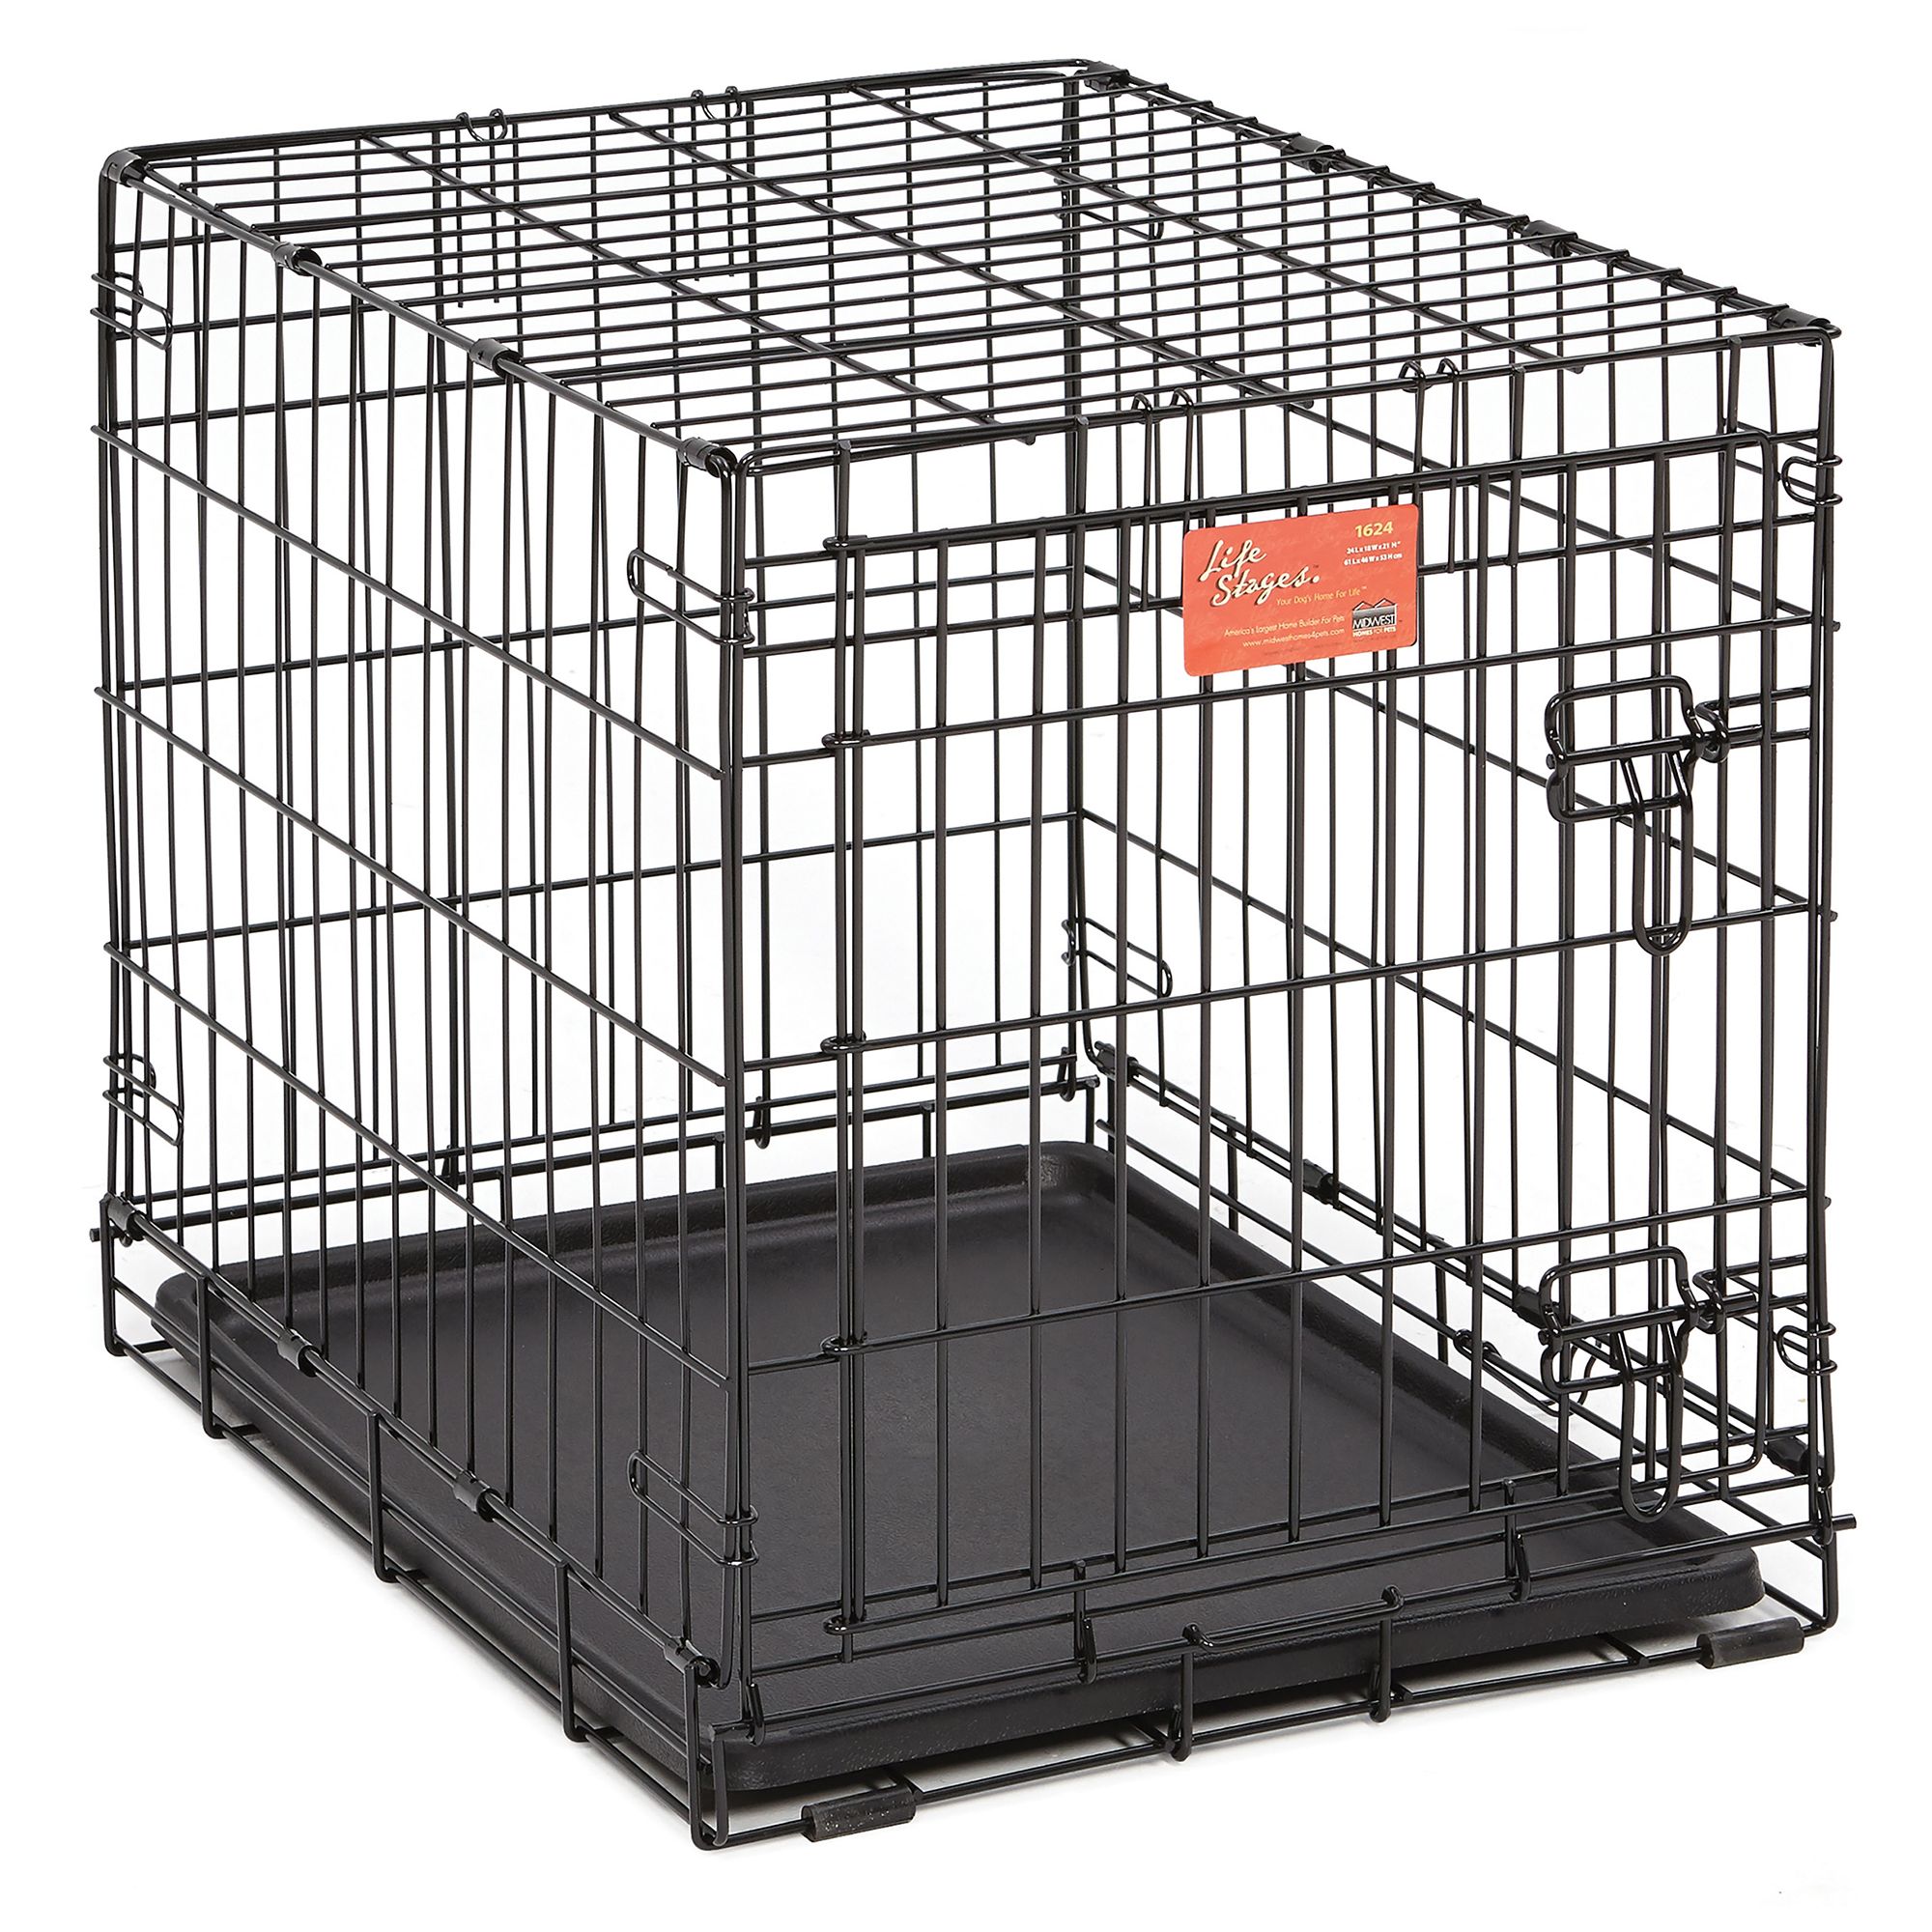 joining 2 dog crates together